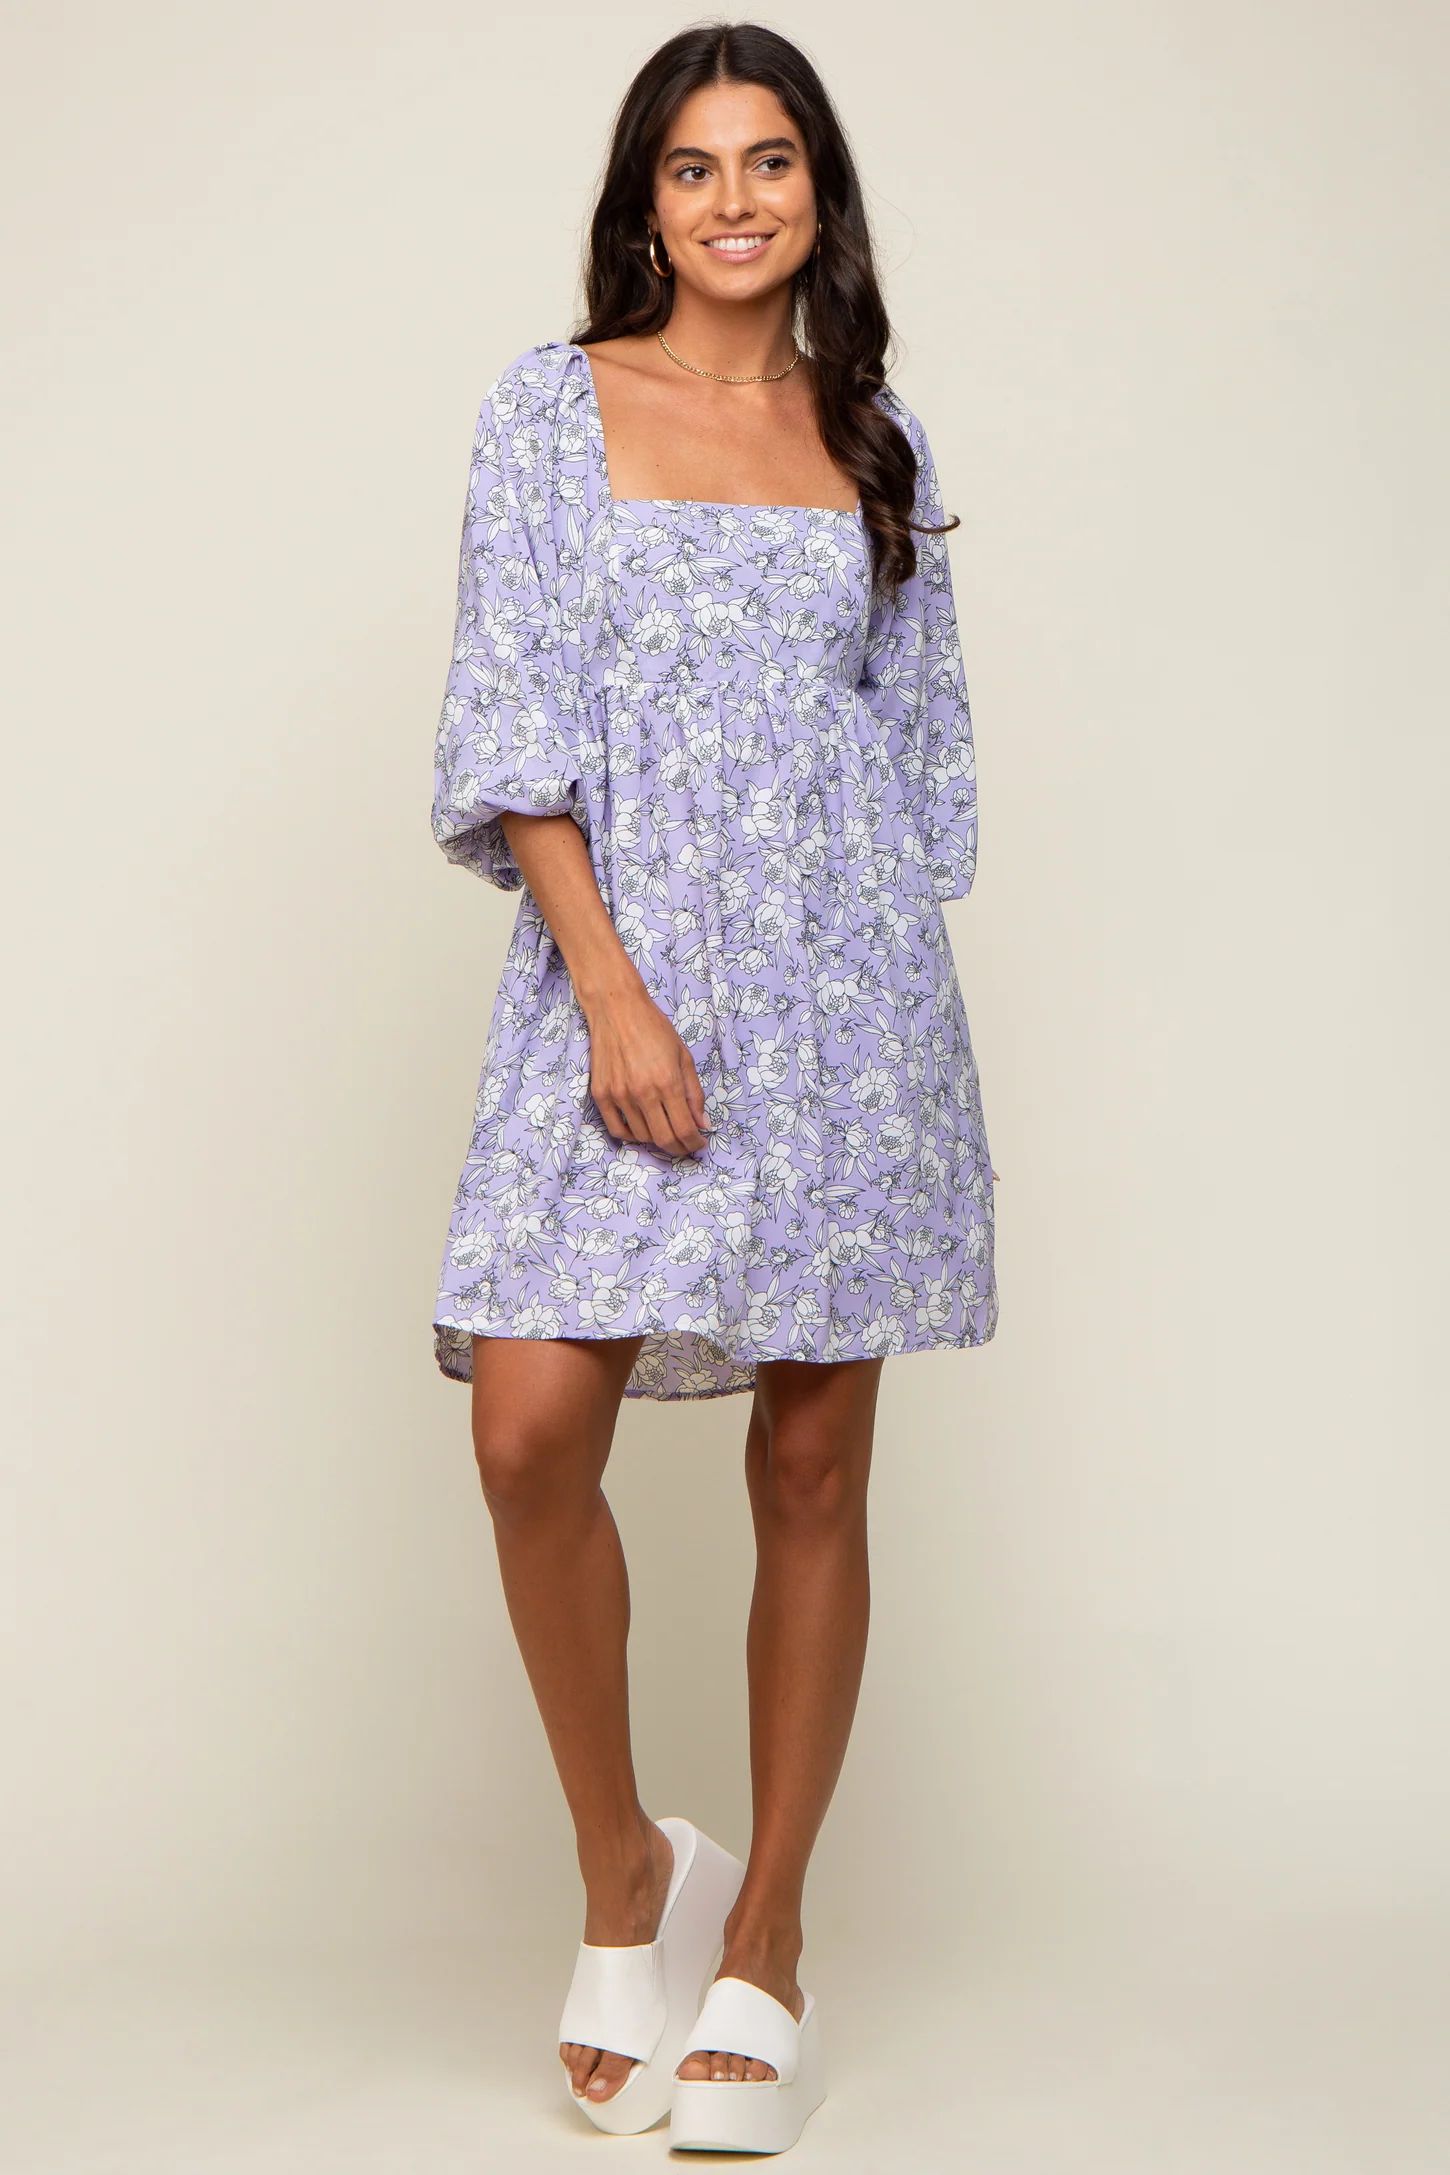 Lavender Floral Square Neck Back Cut Out Tie Dress | PinkBlush Maternity